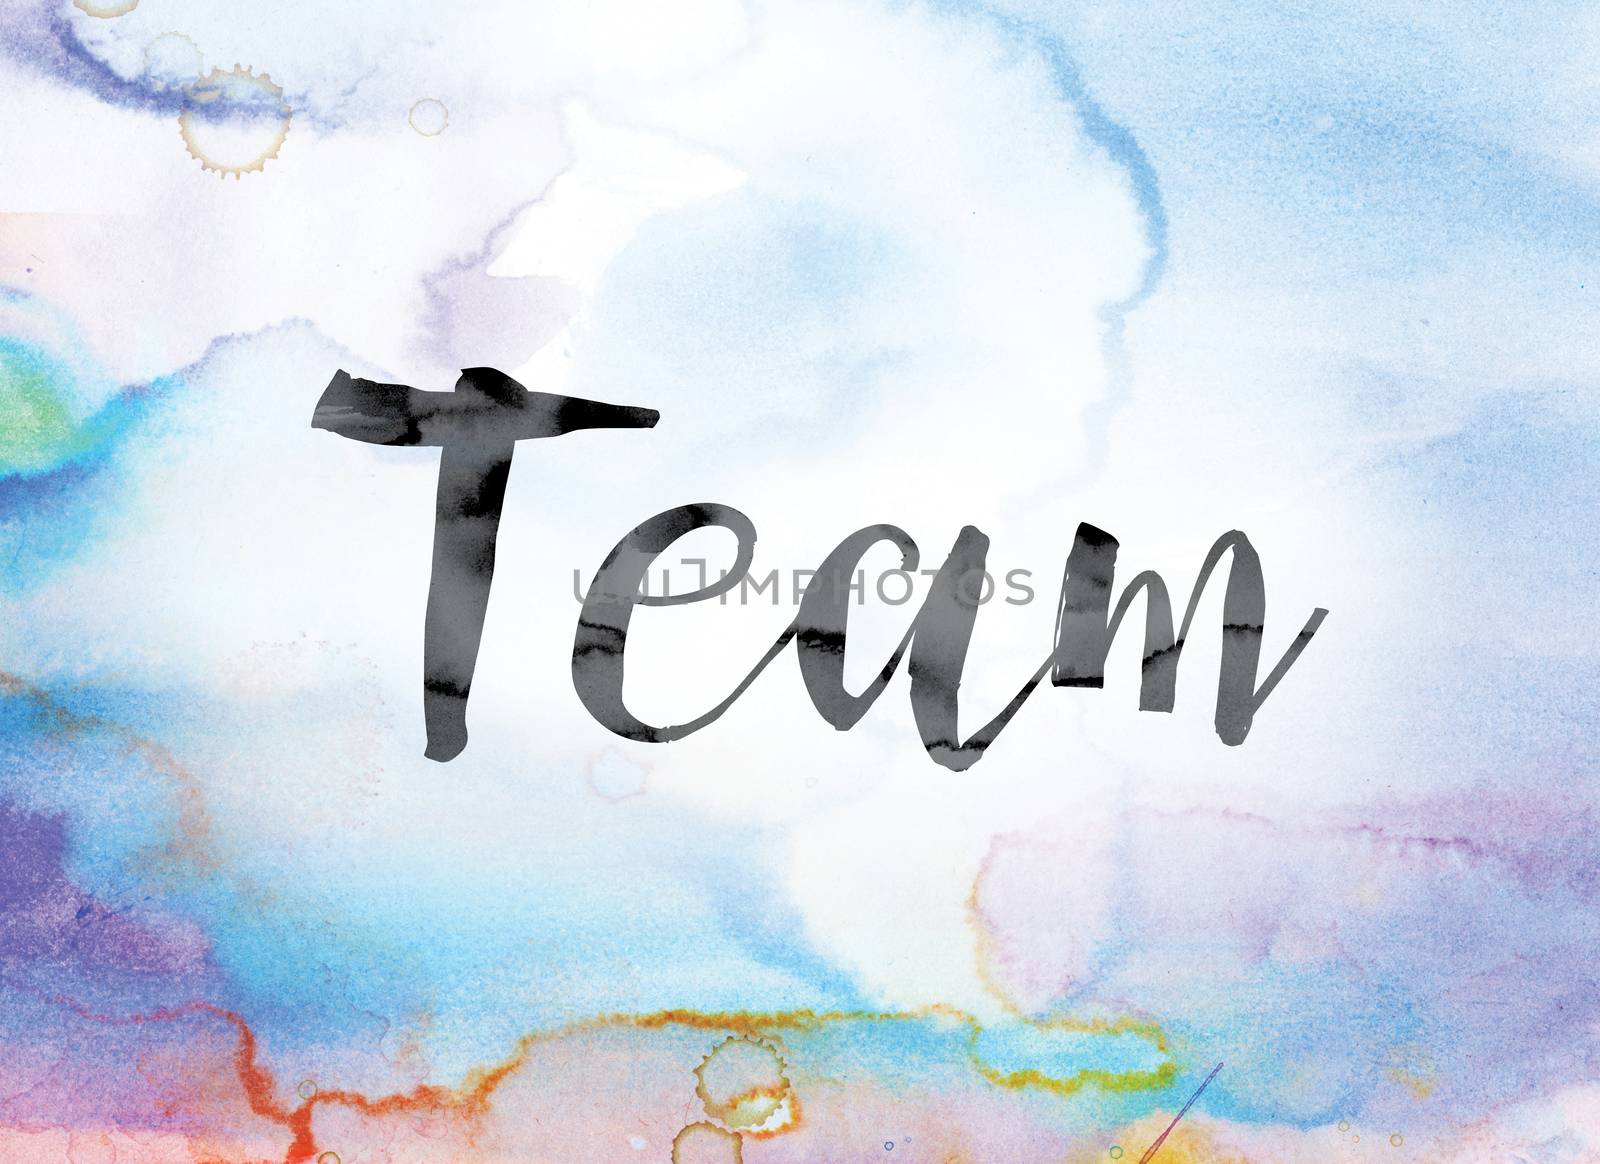 The word "Team" painted in black ink over a colorful watercolor washed background concept and theme.